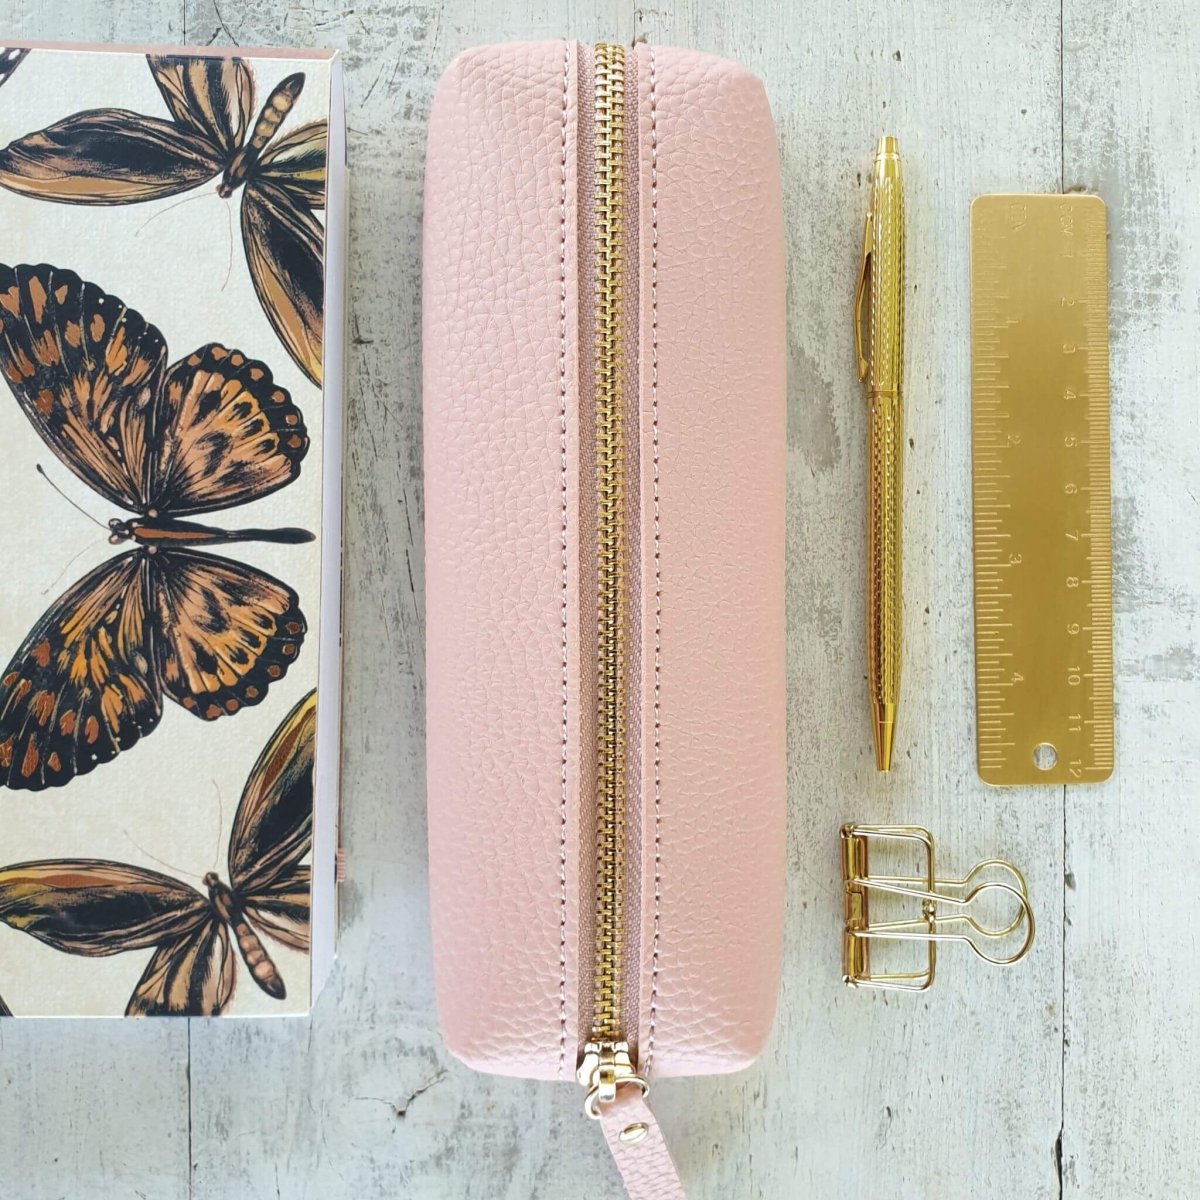 pink pencil case with gold pen, ruler and clip next to notebook